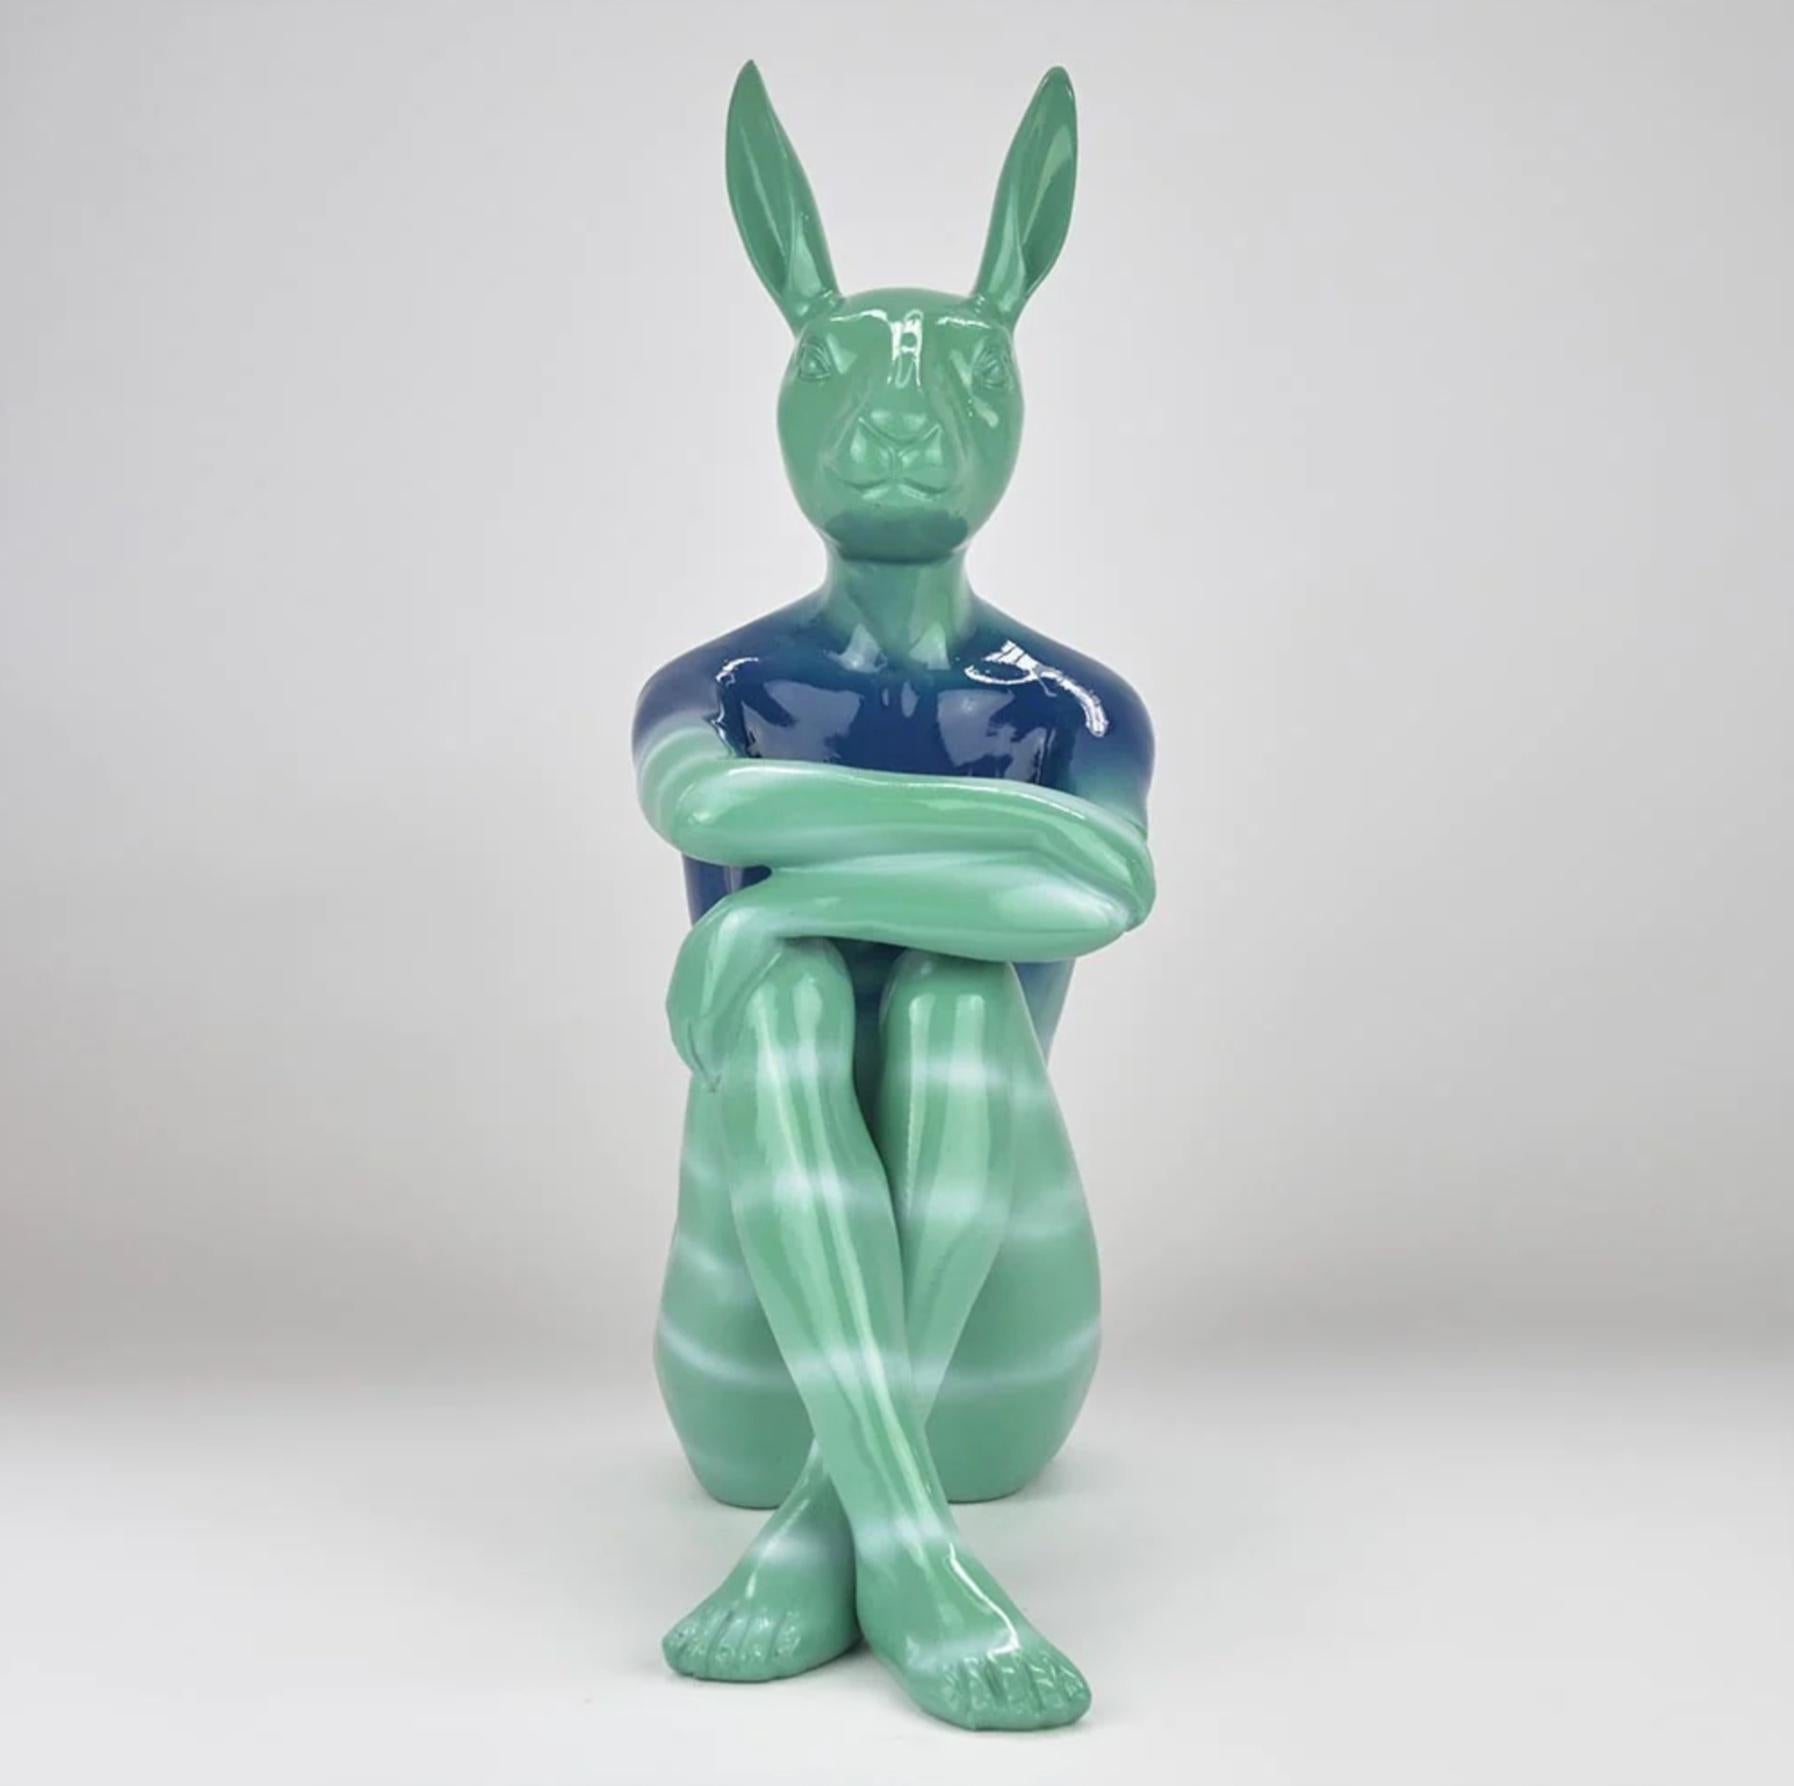 Title: Splash Pop City Bunny (Ocean Blues)
Authentic Resin Sculpture

This authentic bronze sculpture titled 'Splash Pop City Bunny' in Ocean Blues Style by artists Gillie and Marc has been meticulously crafted in resin. This sculpture features